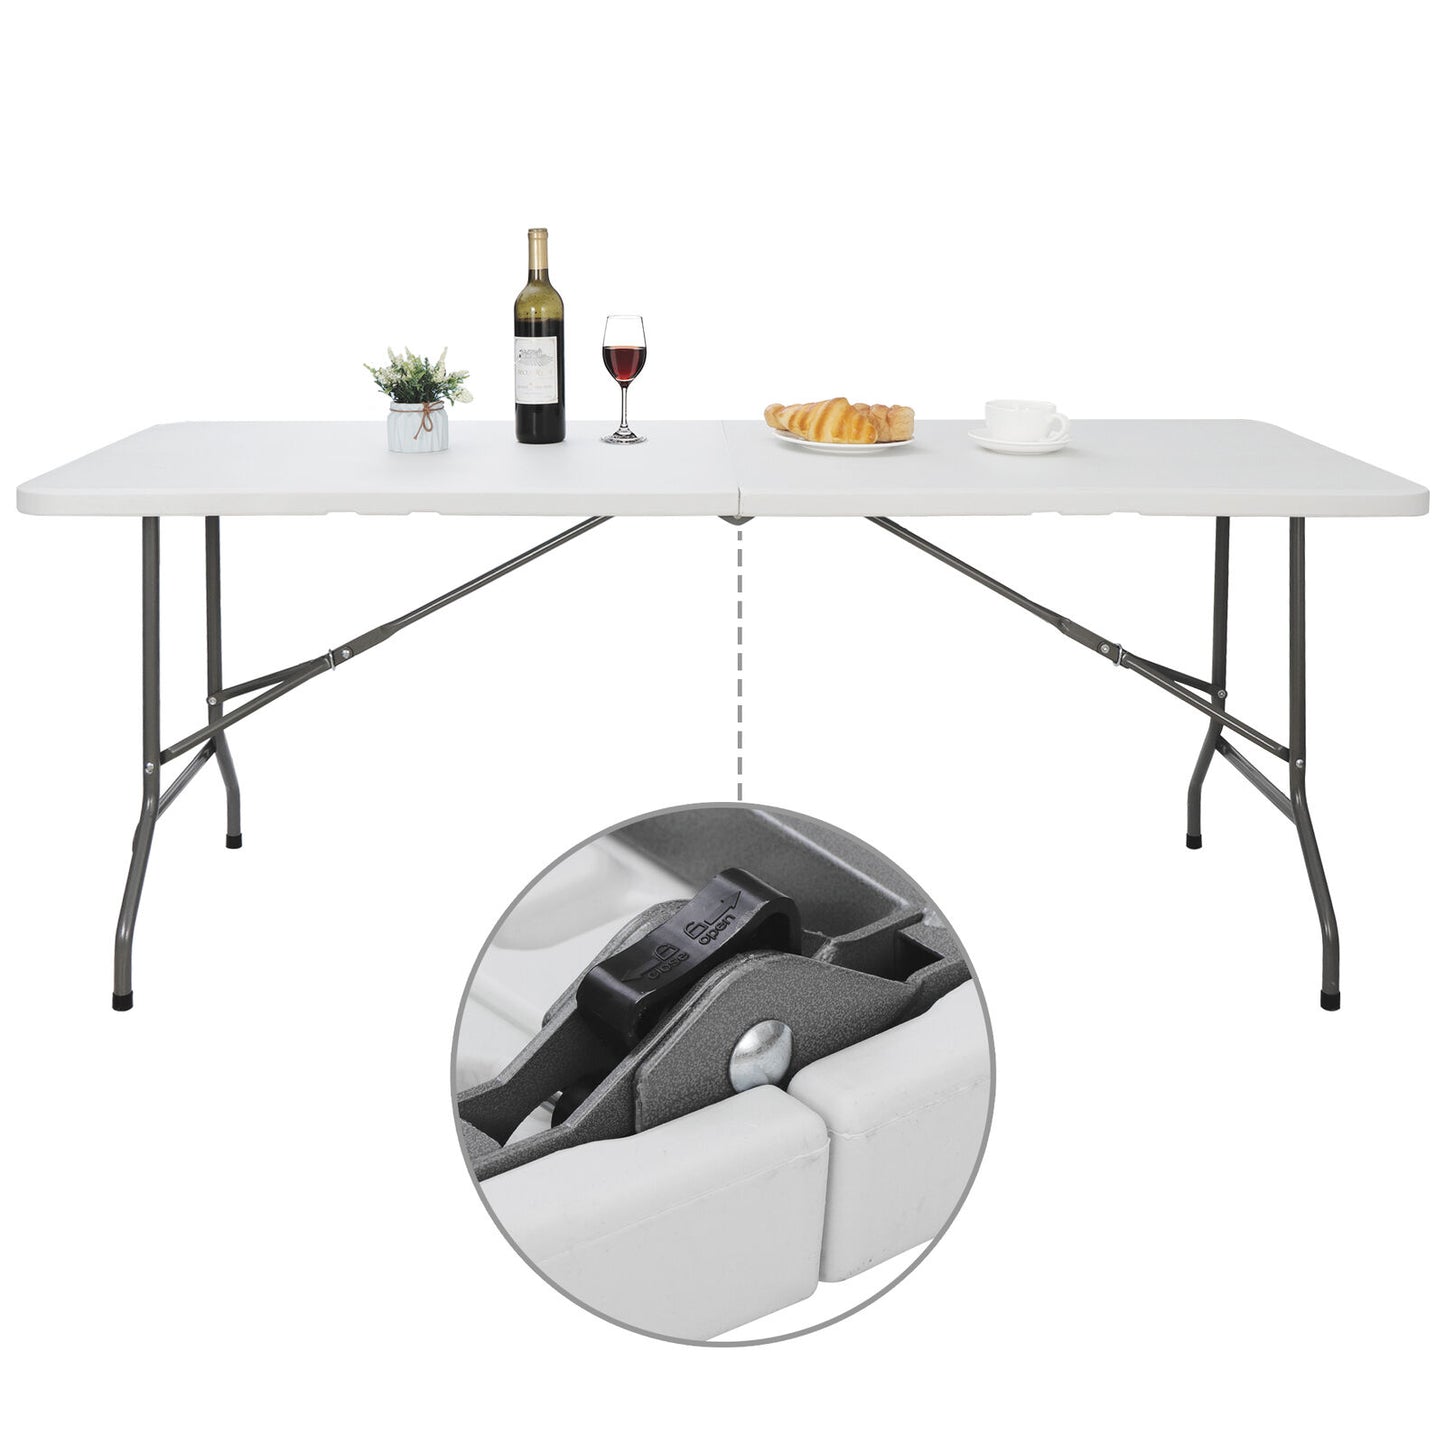 6FT Plastic Folding Table Portable Fold-in-Half Picnic Utility Table with Handle